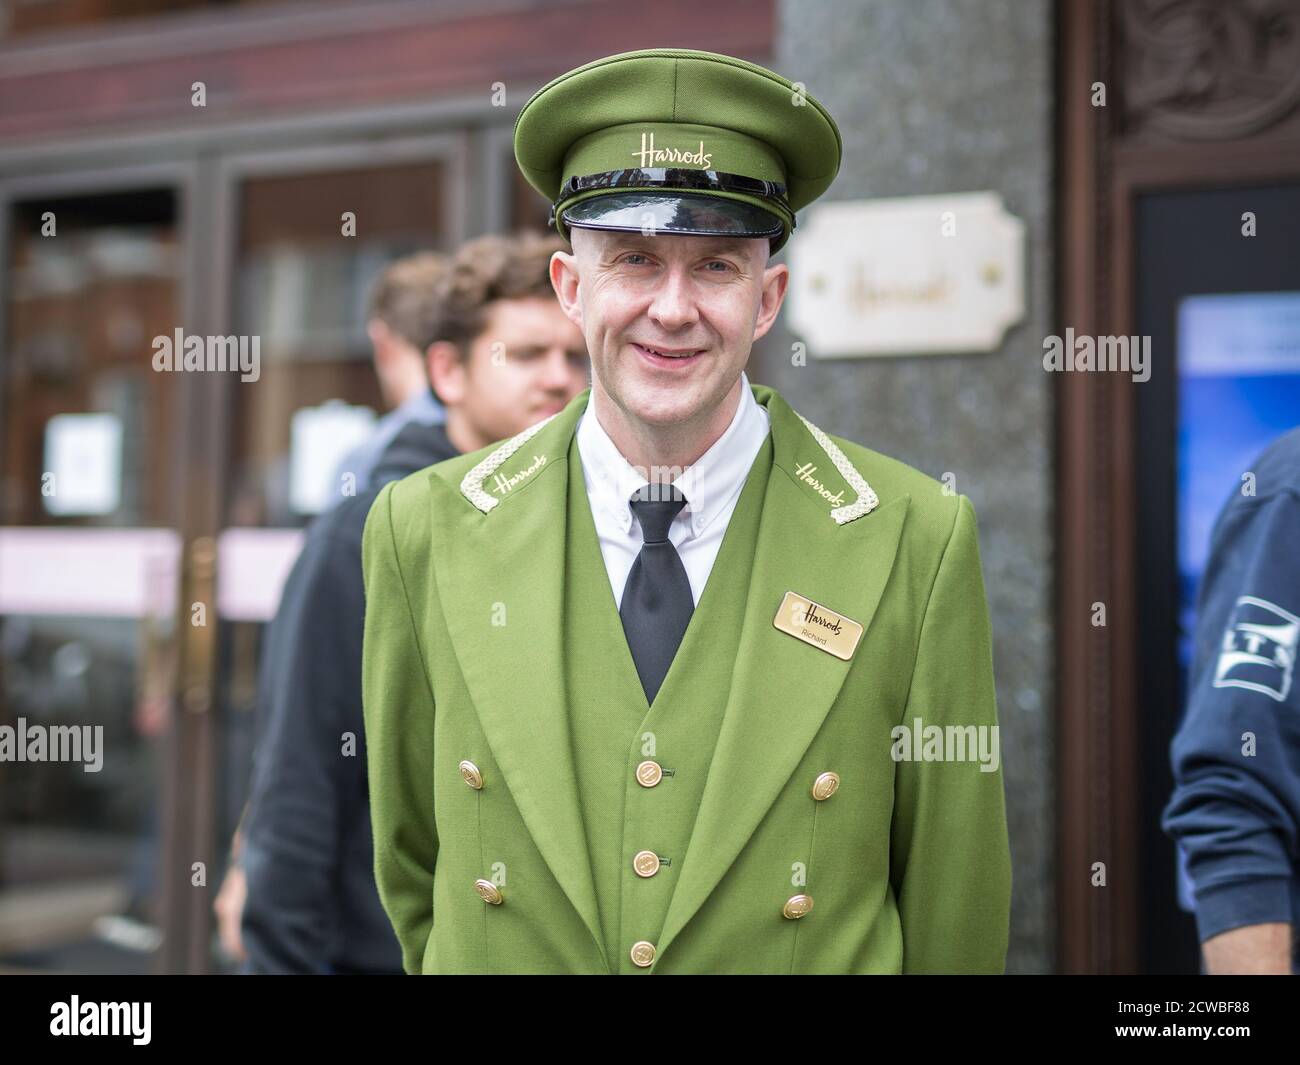 Street Photography: Portrait of Harrods Department Store Receptionist with Green Uniform and Hat in London. Stock Photo